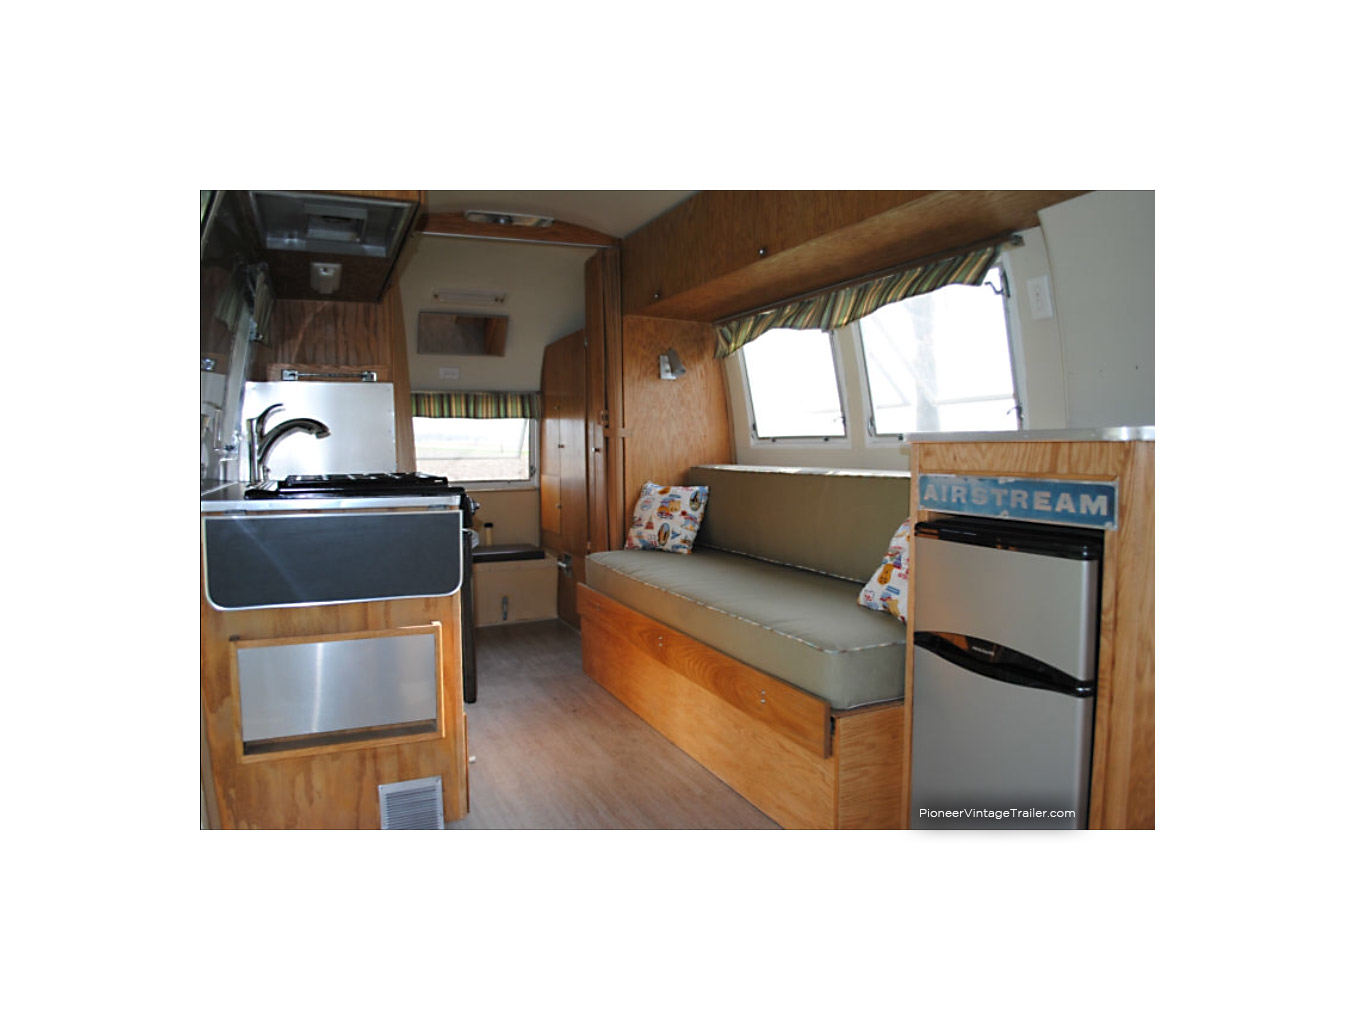 Airstream renovated interior by PVT